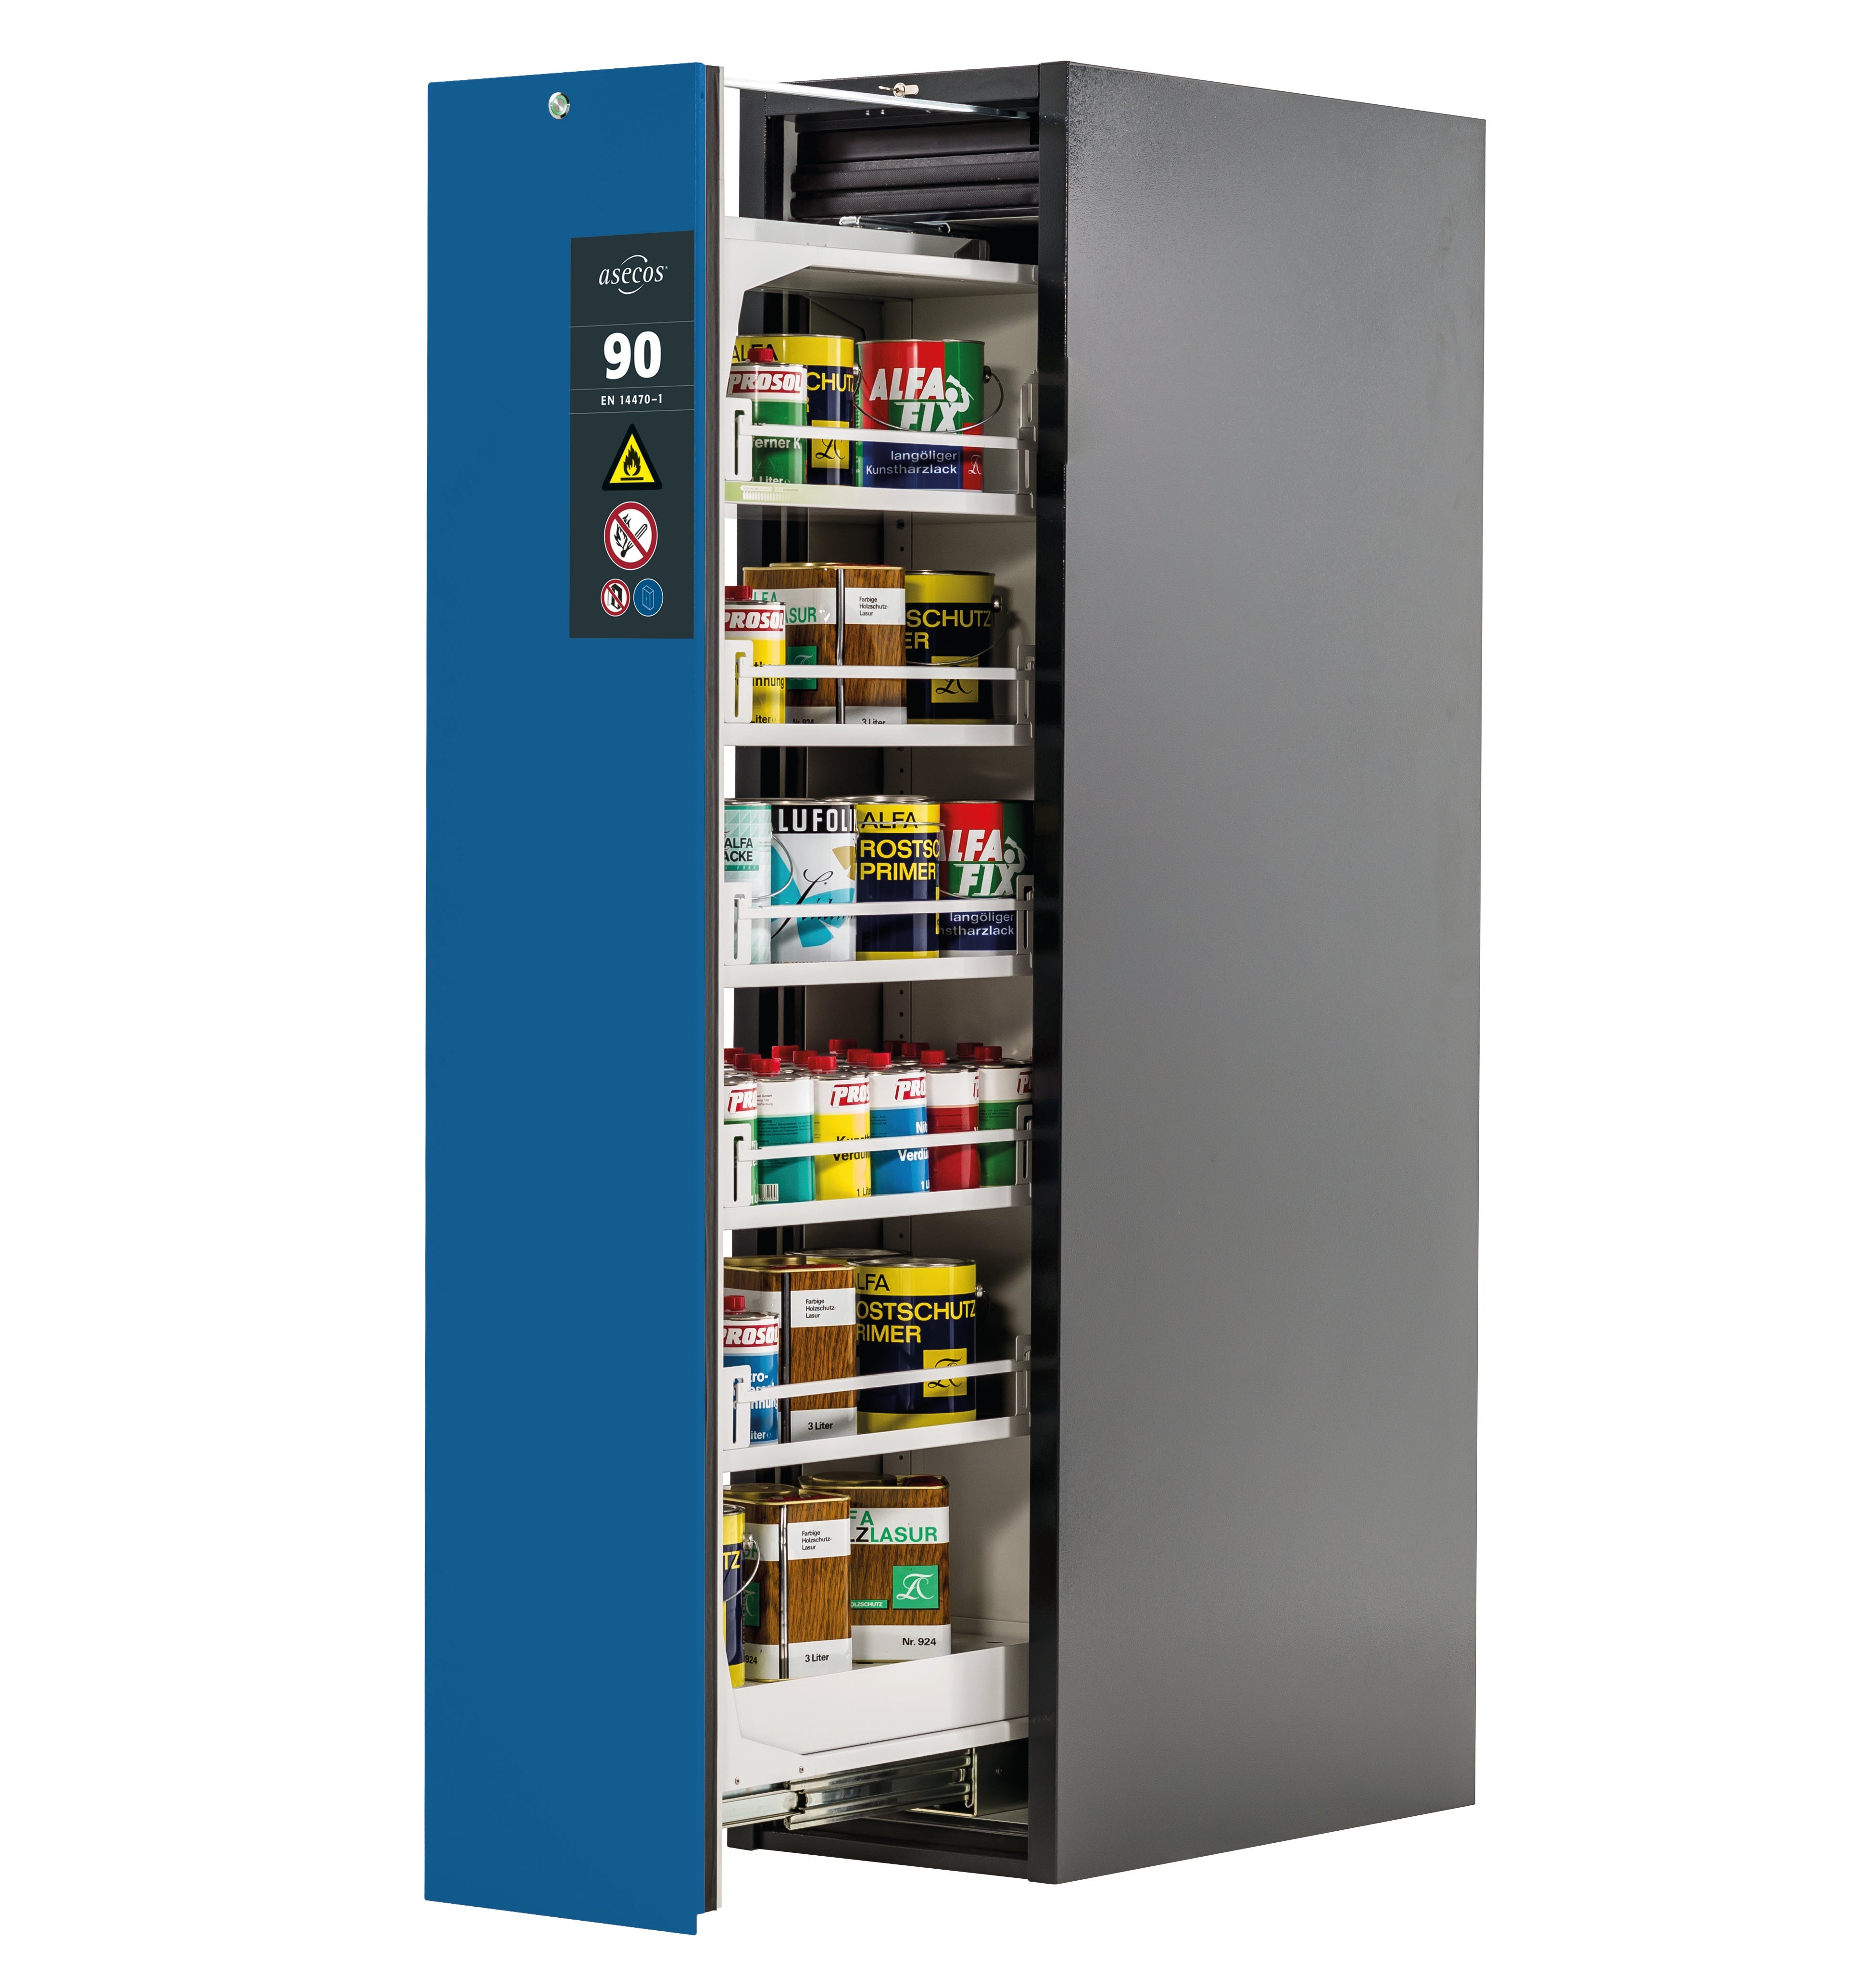 Type 90 safety cabinet V-MOVE-90 model V90.196.045.VDAC:0013 in gentian blue RAL 5010 with 5x standard shelves (sheet steel)